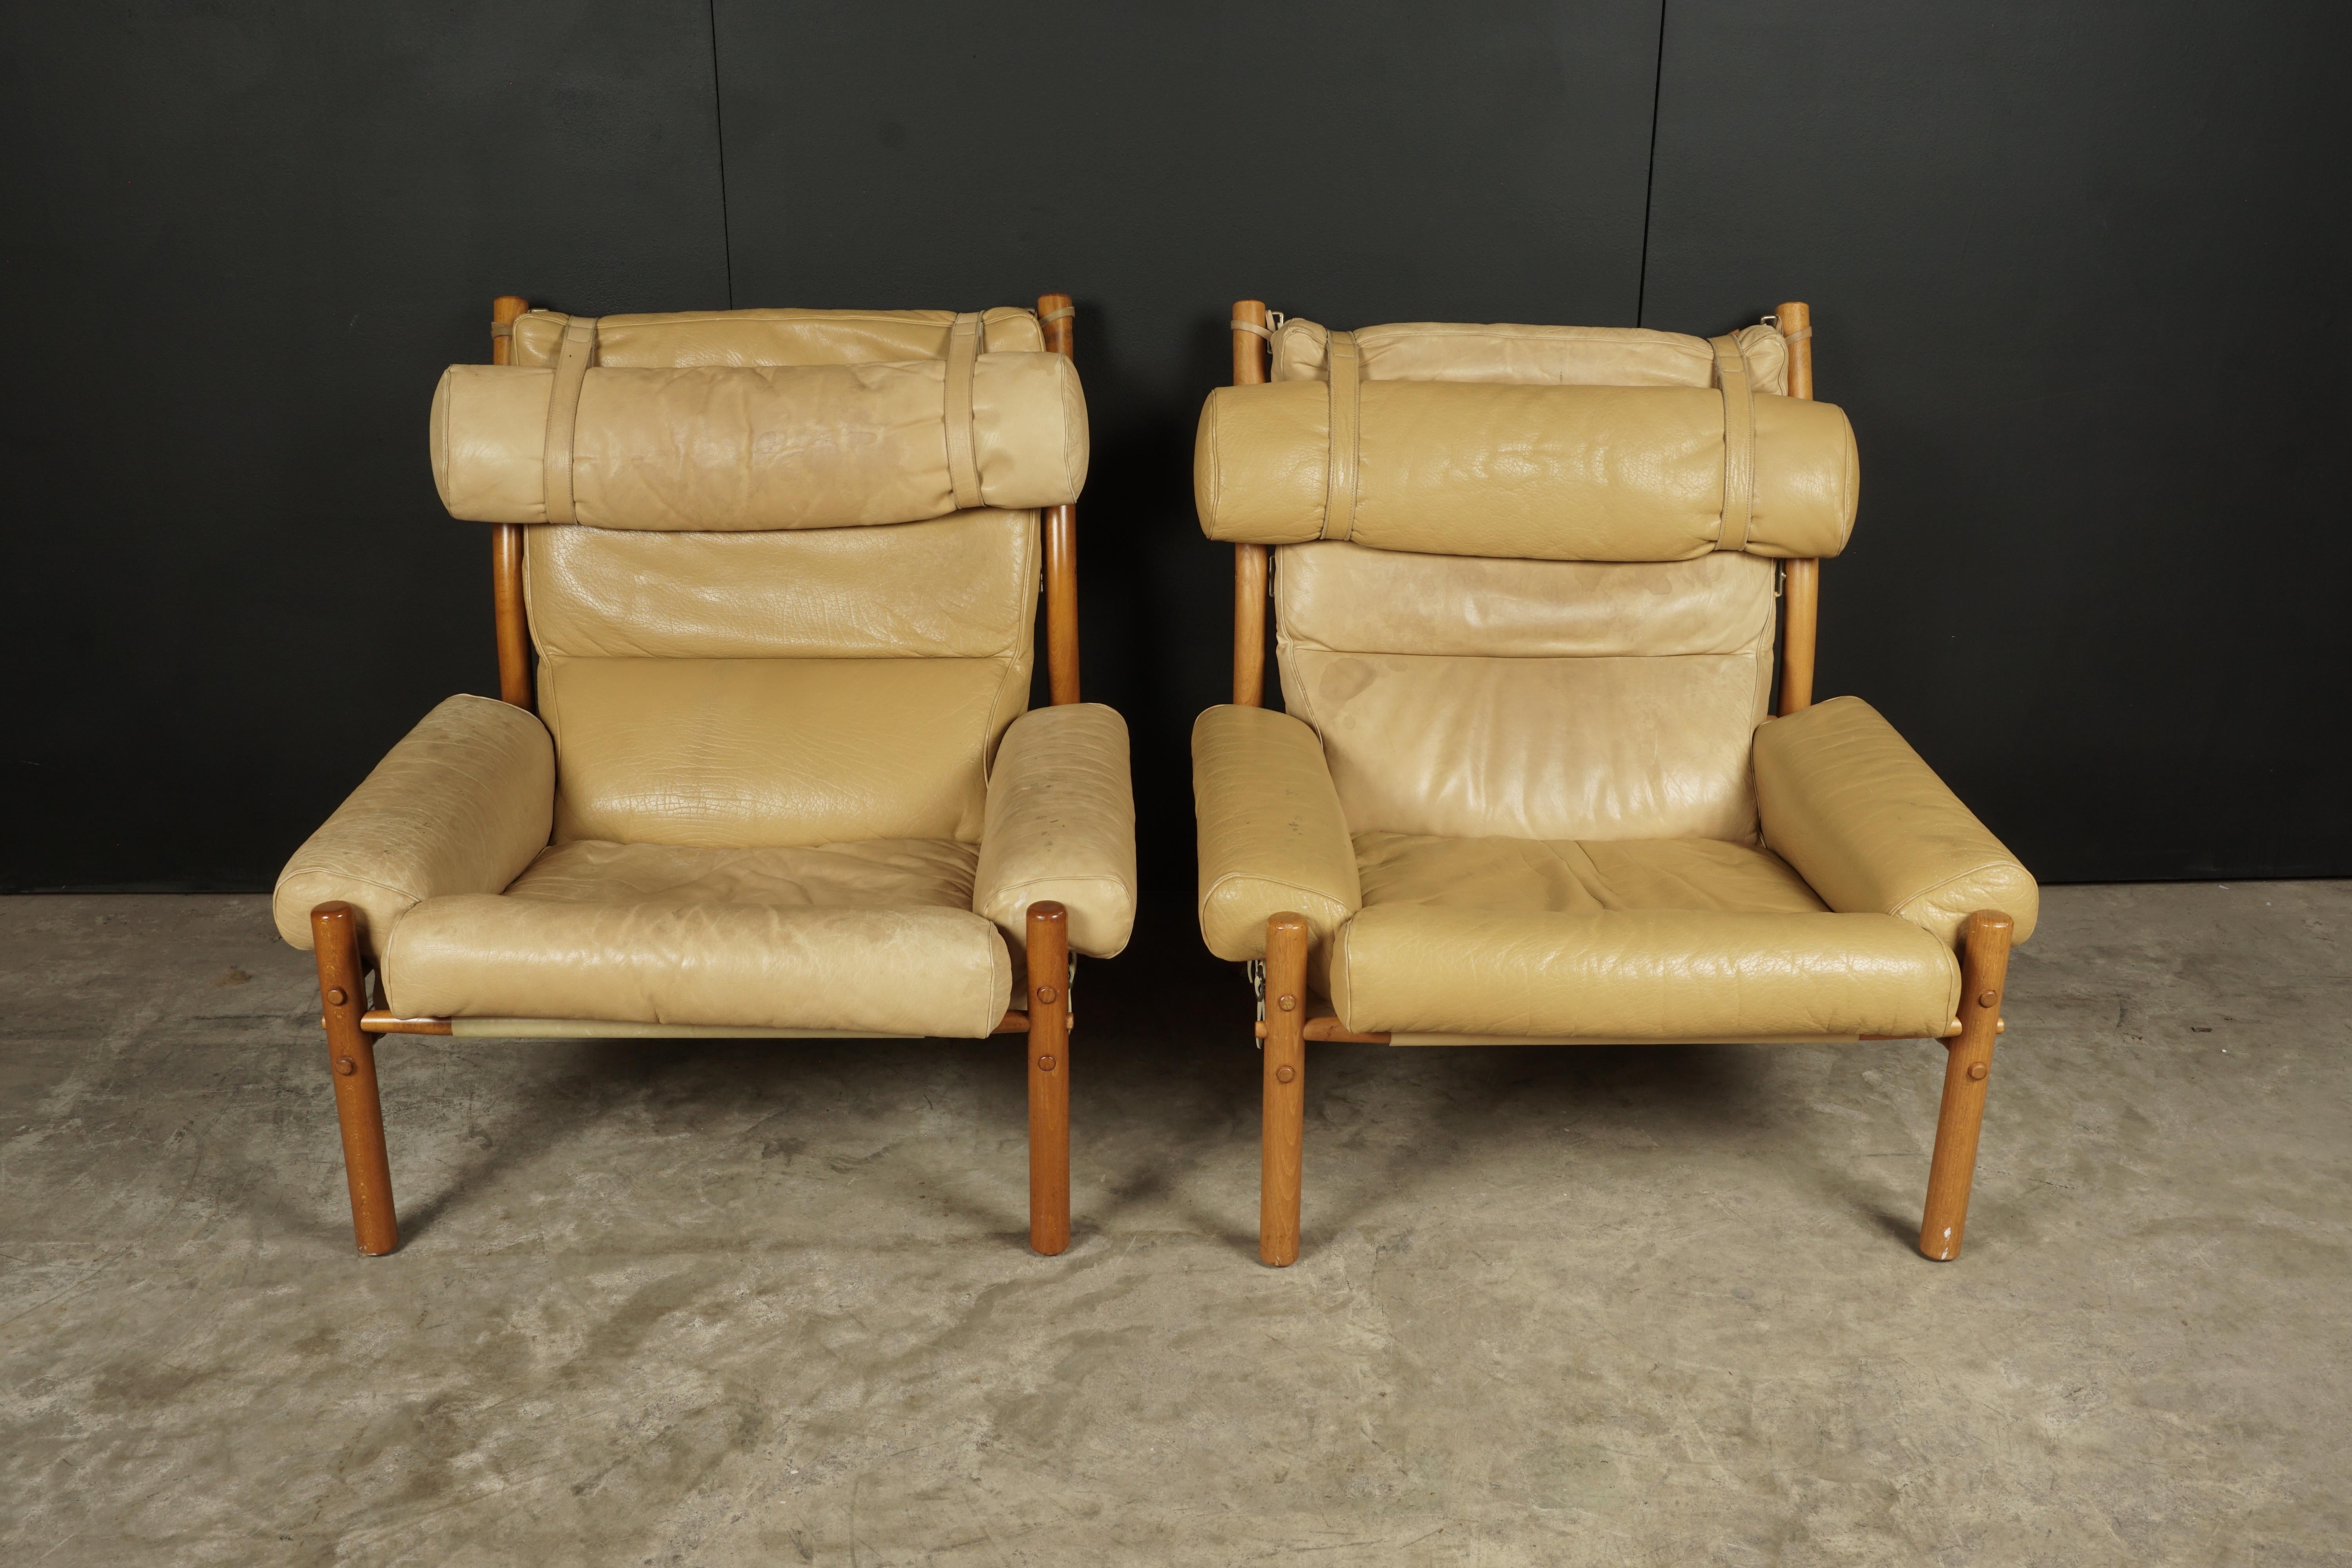 European Pair of Arne Norell Lounge Chairs with Foot Stools, Model Inca, circa 1960